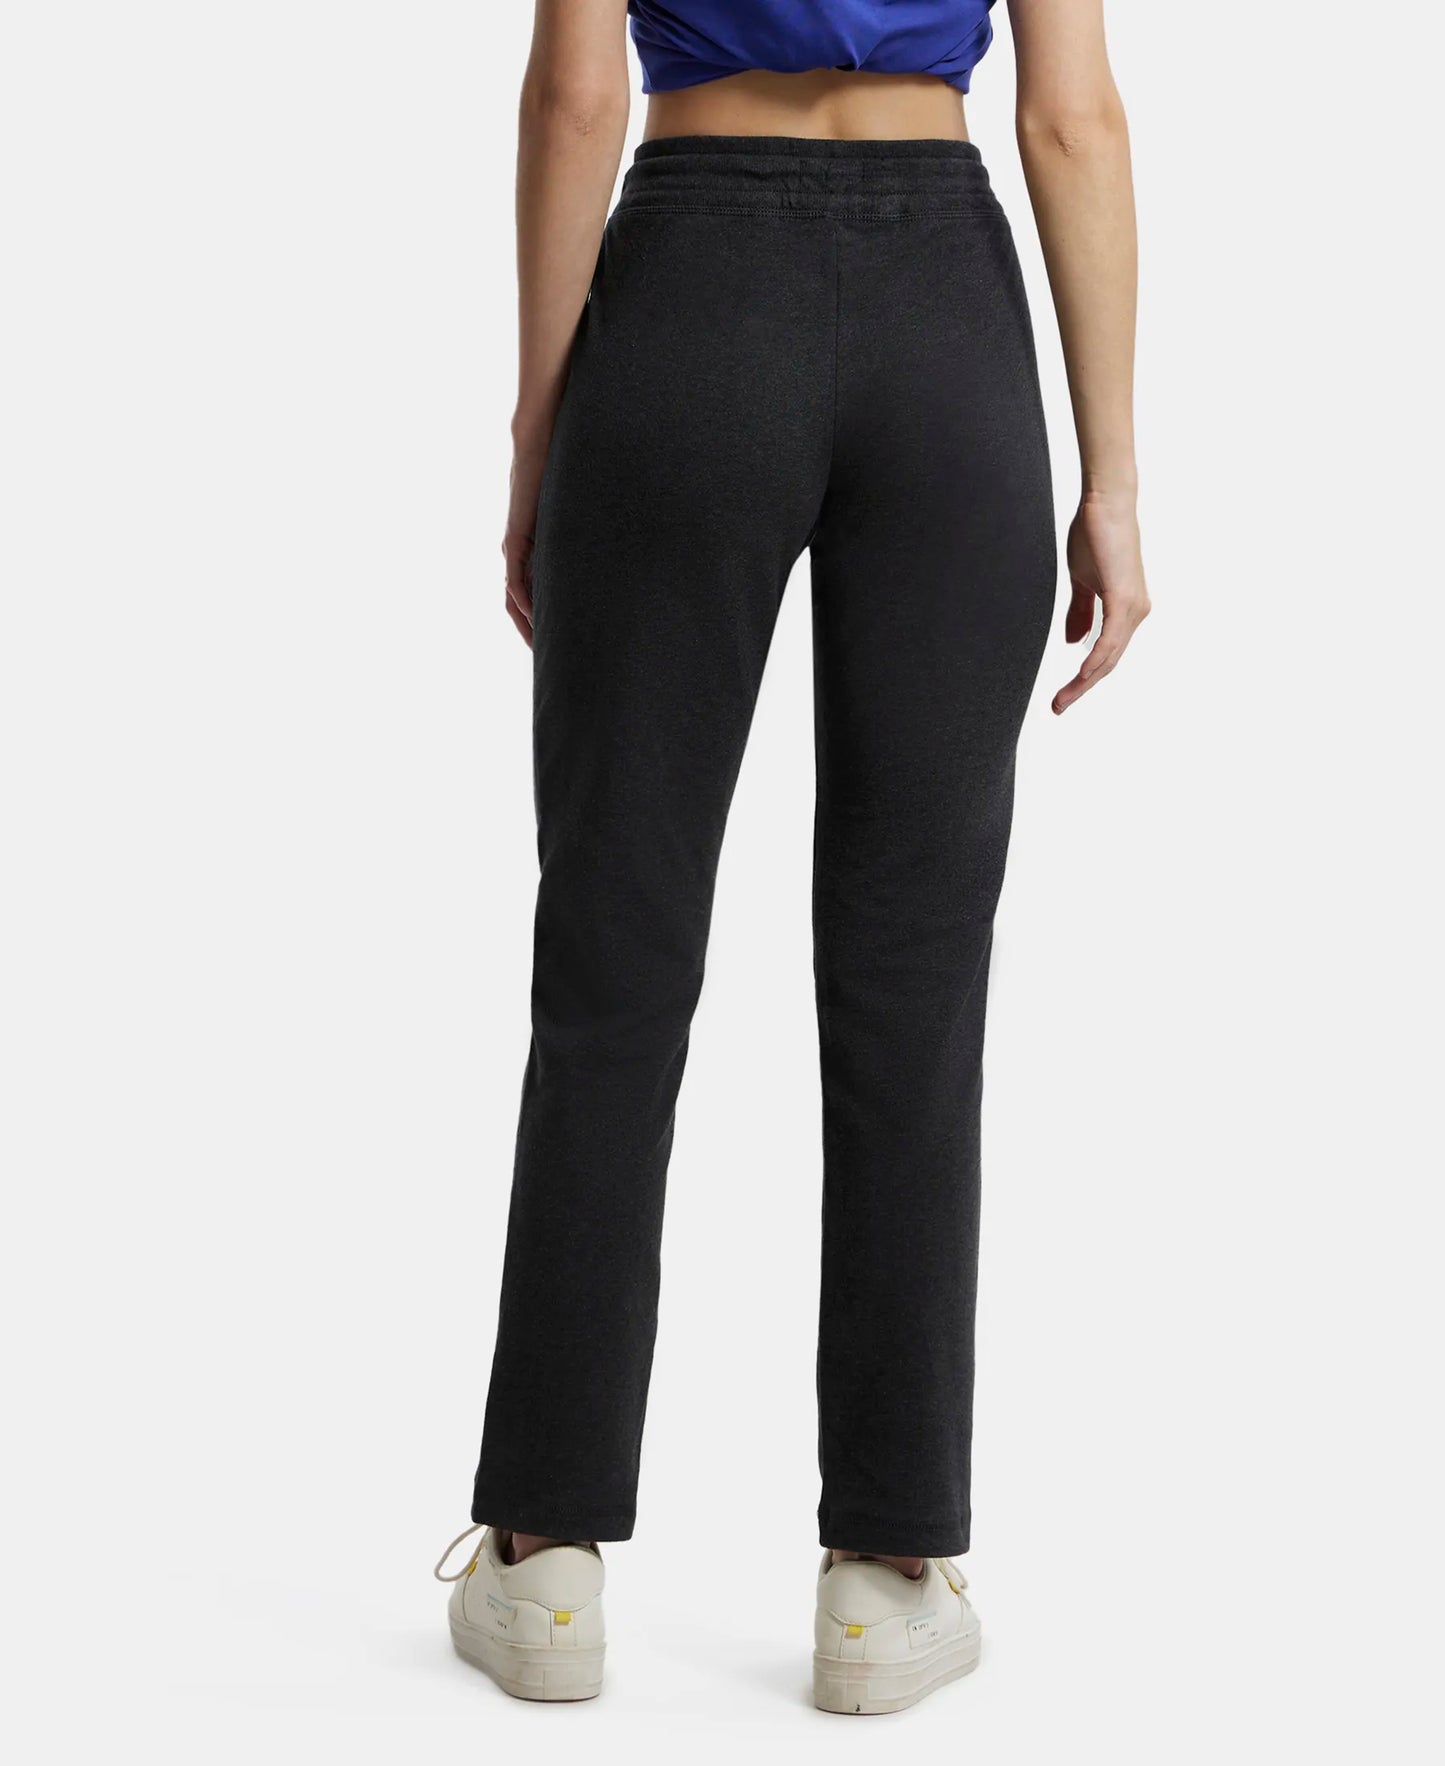 Super Combed Cotton French Terry Track Pant with Side Pockets - Black Melange-3